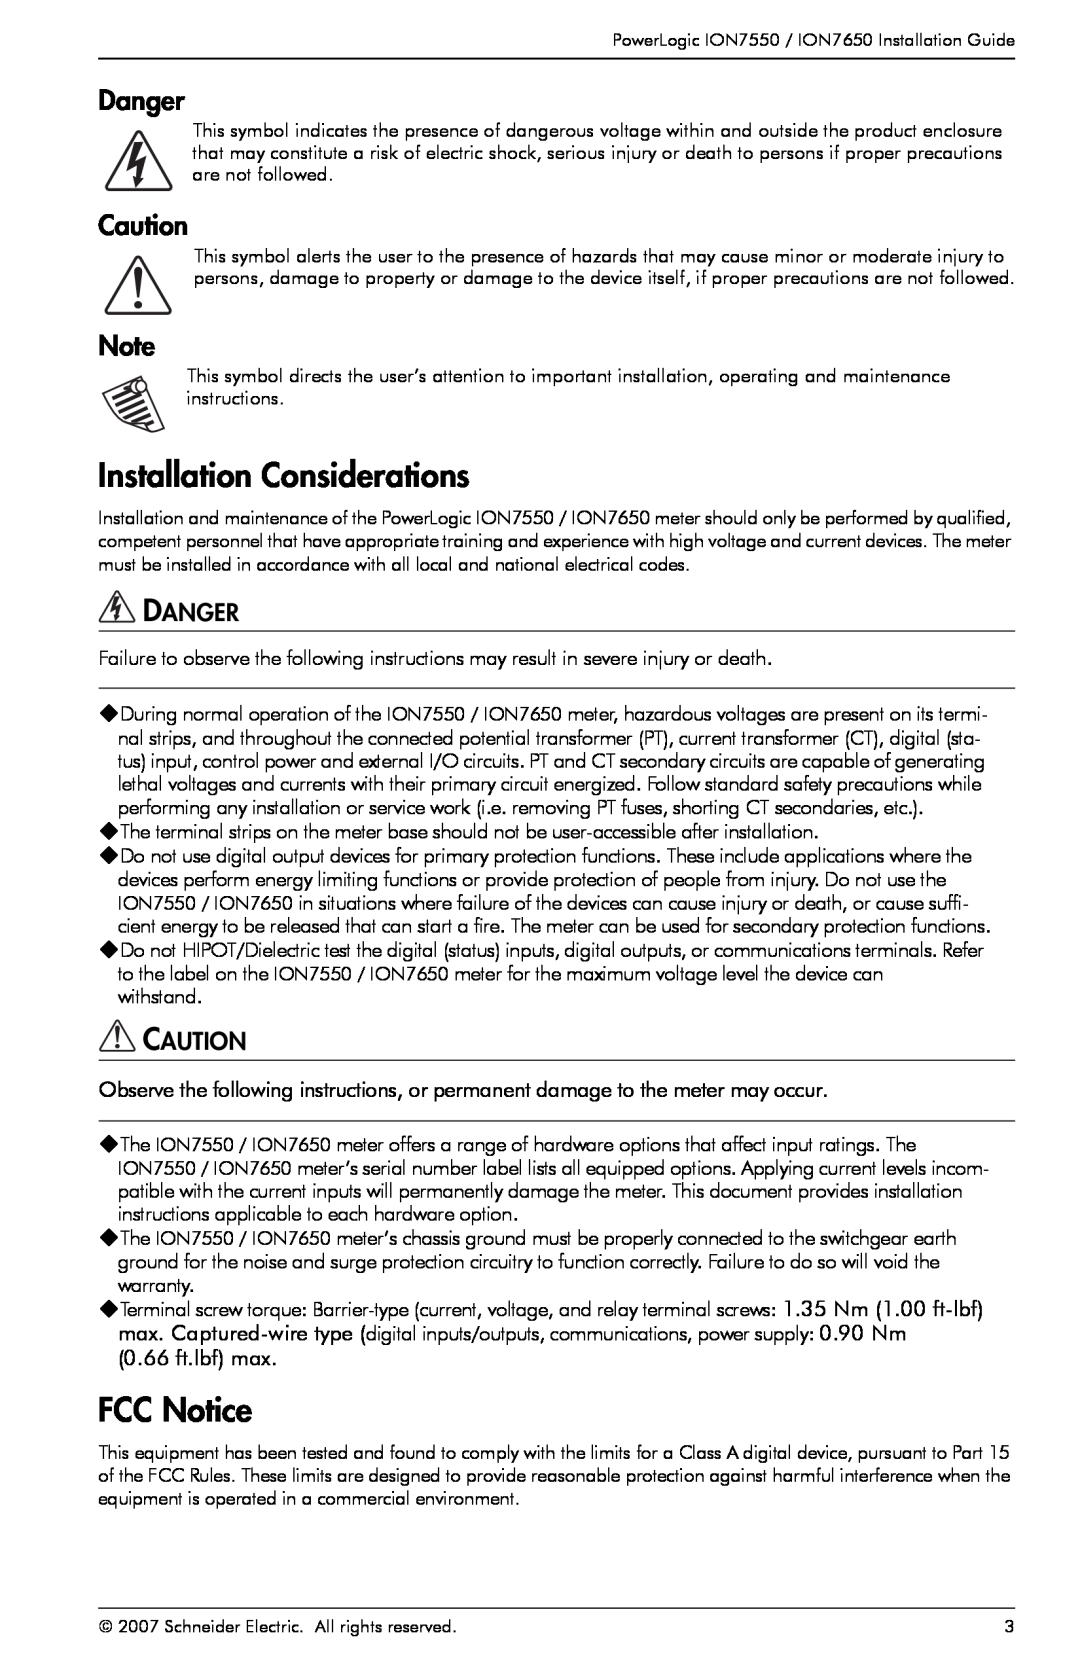 Schneider Electric ION7550, ION7650 manual Installation Considerations, FCC Notice, Danger 